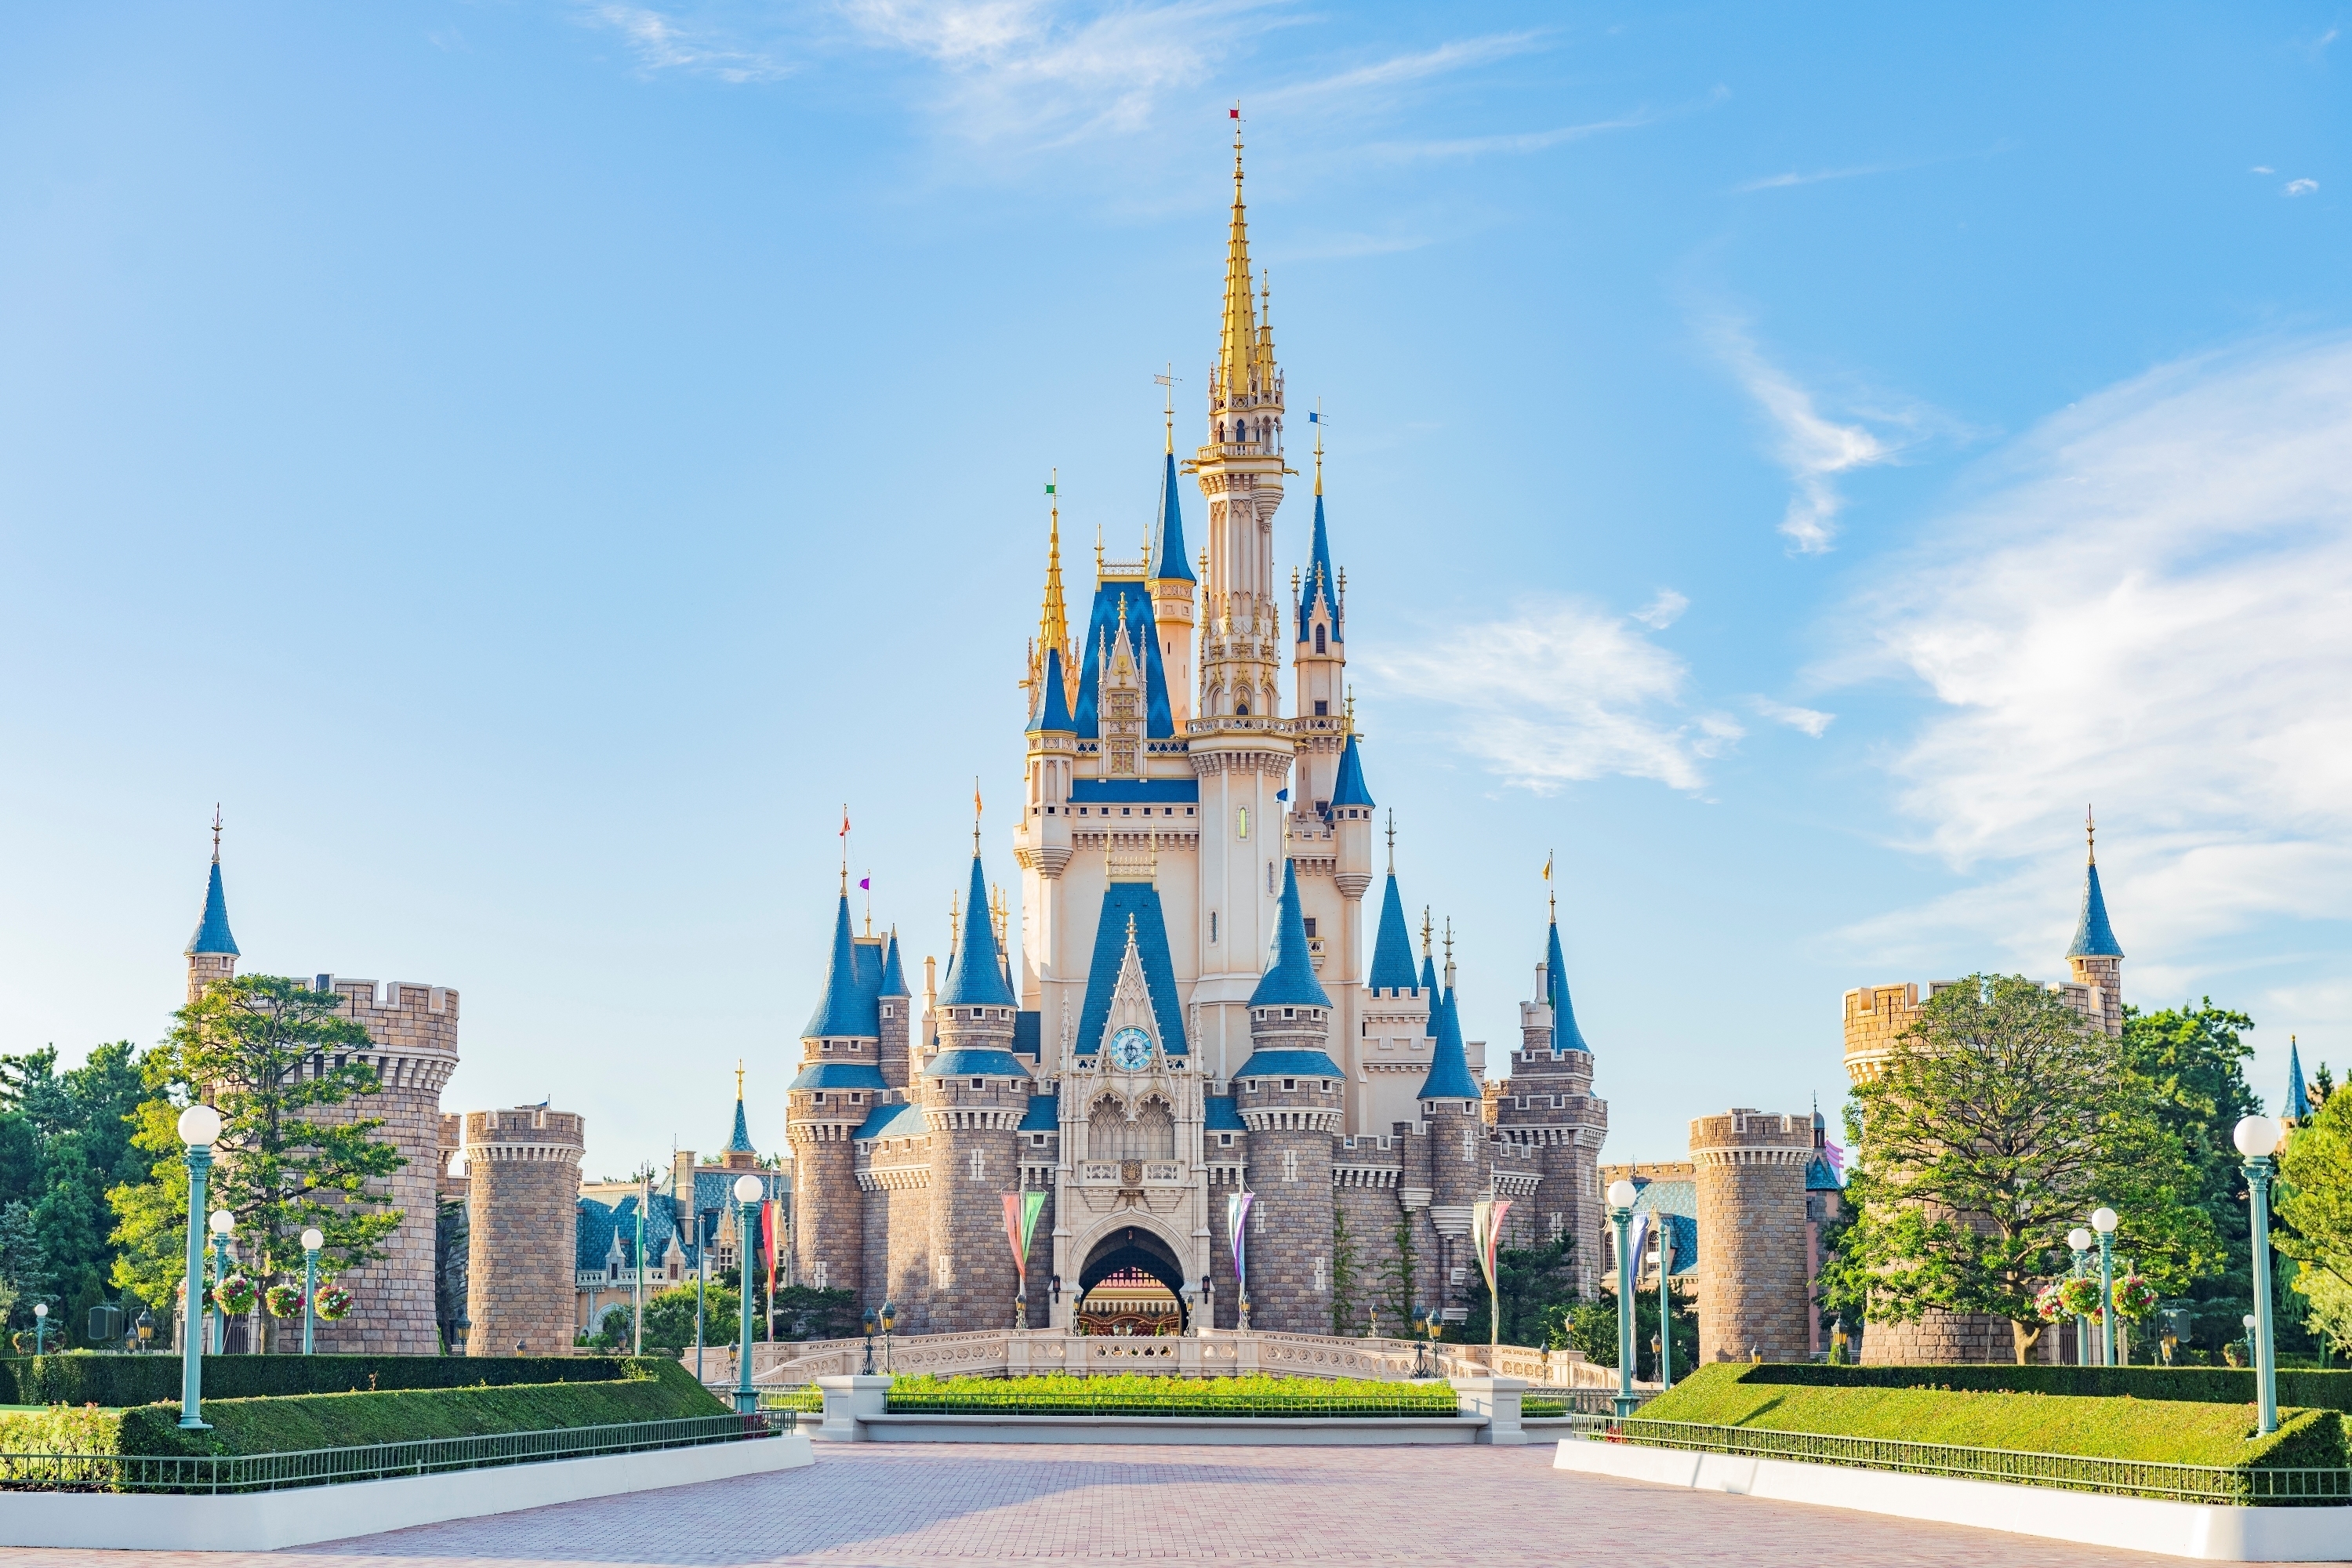 HD wallpaper of Cinderella Castle at Tokyo Disneyland with a clear blue sky backdrop.